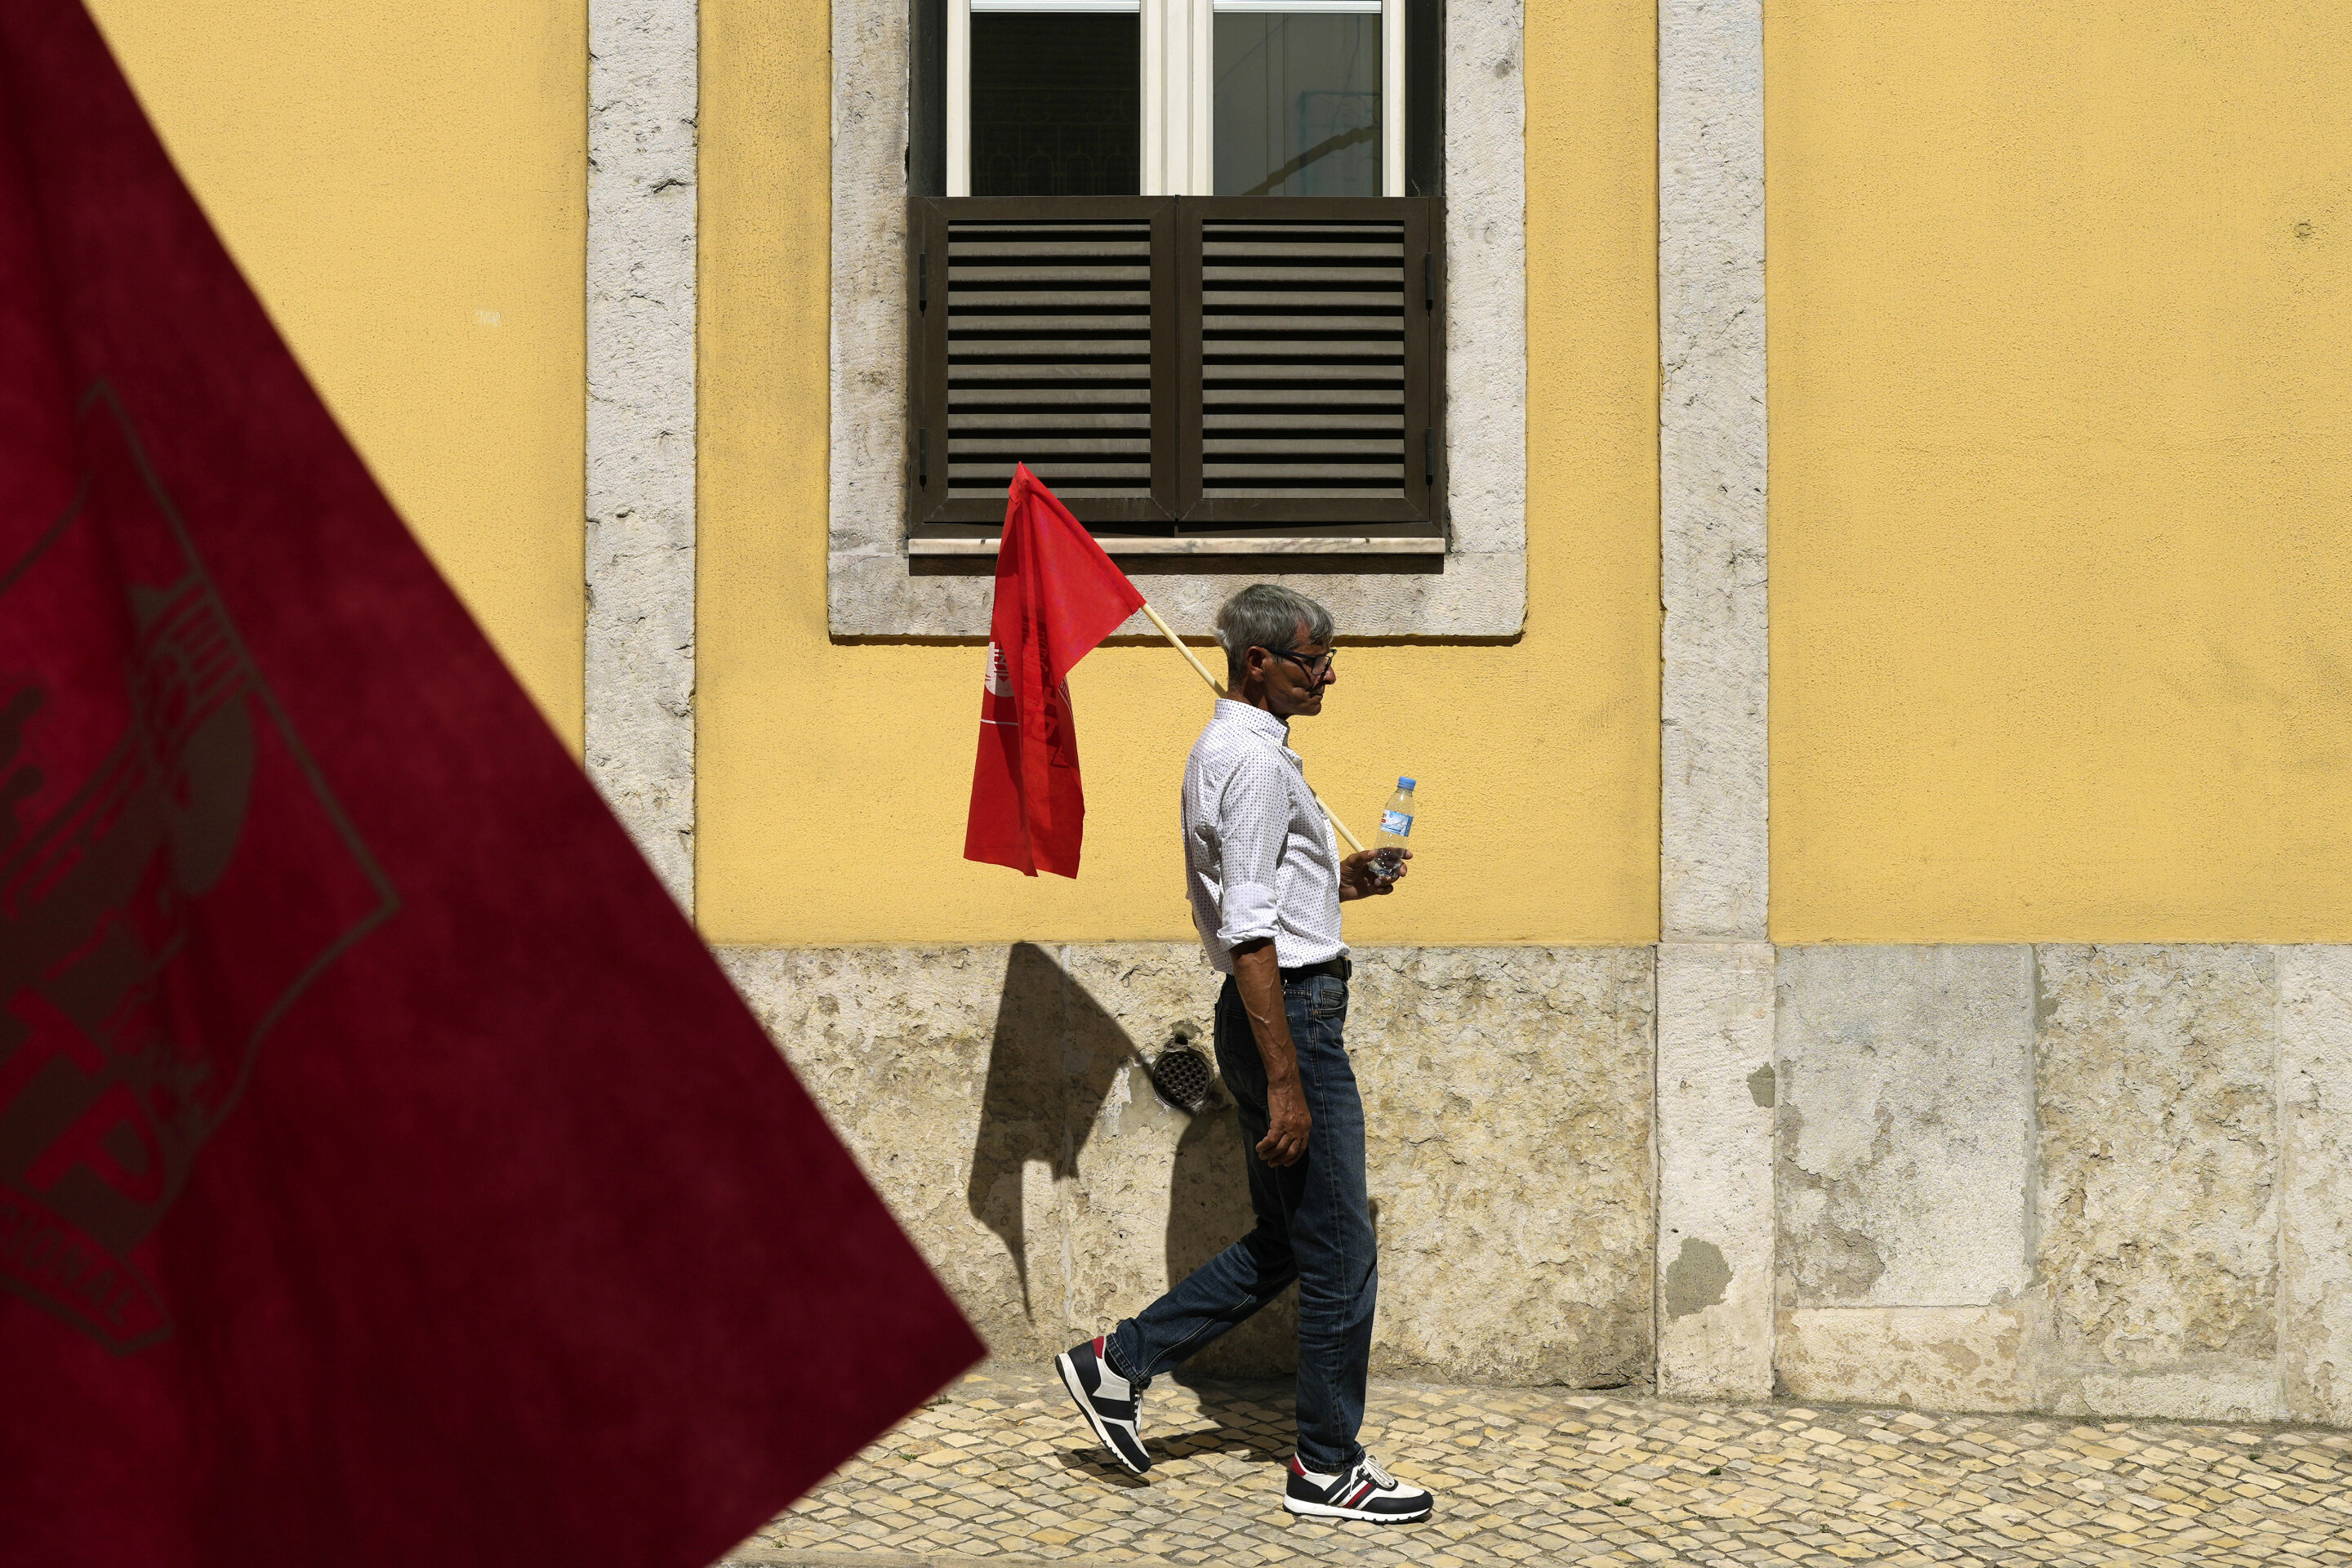 #Portugal sets new July heat record, worsening severe drought